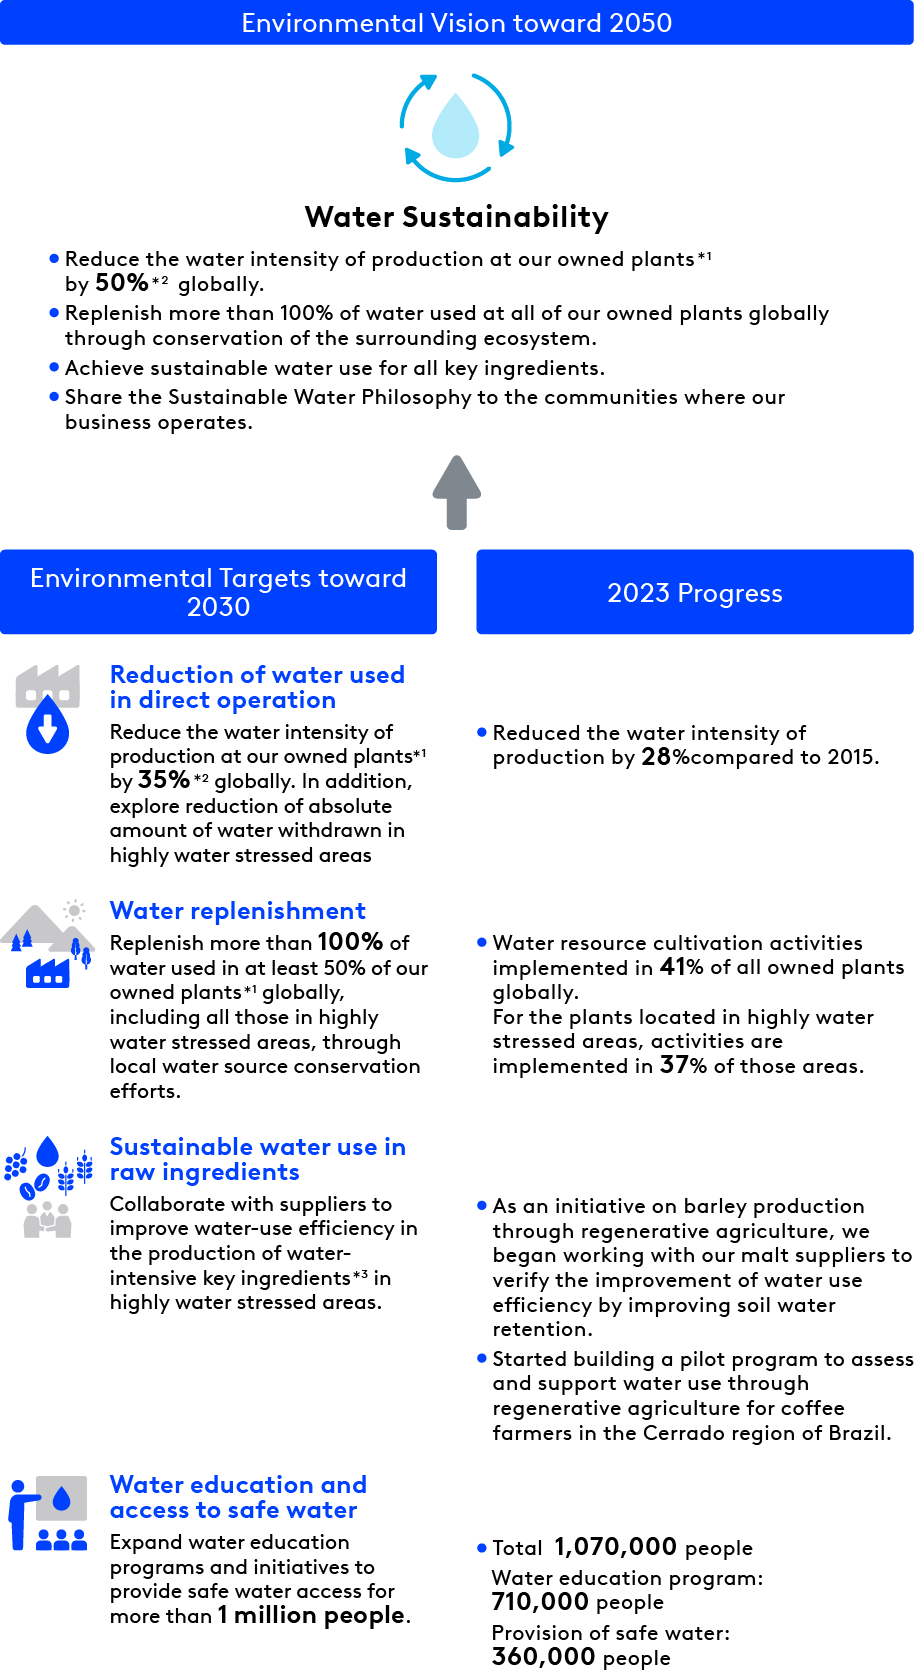 Targets and Progress for Water 